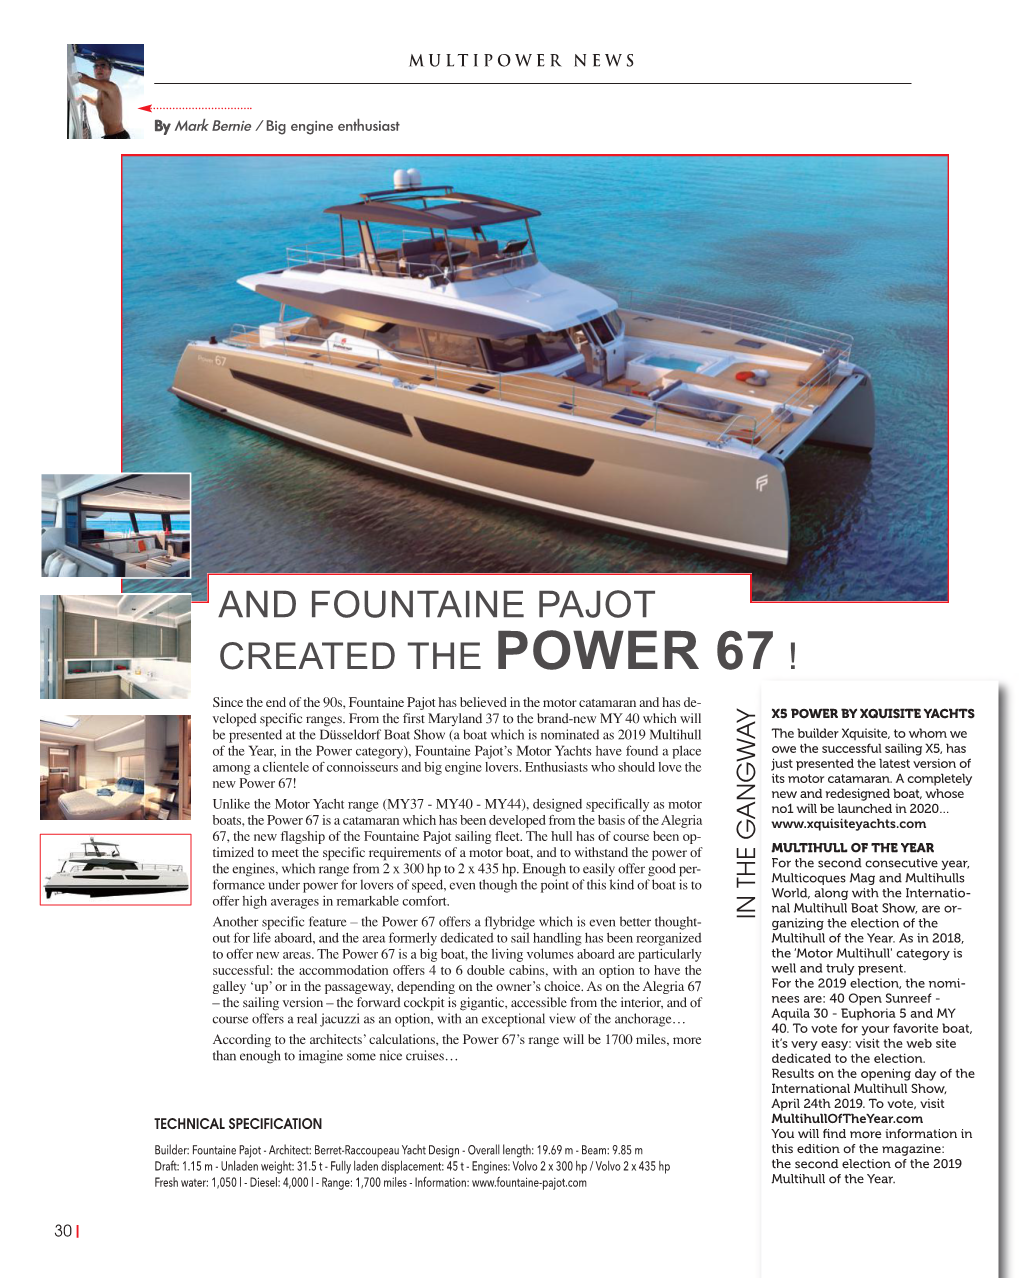 Multihulls World, Along with the Internatio- Offer High Averages in Remarkable Comfort